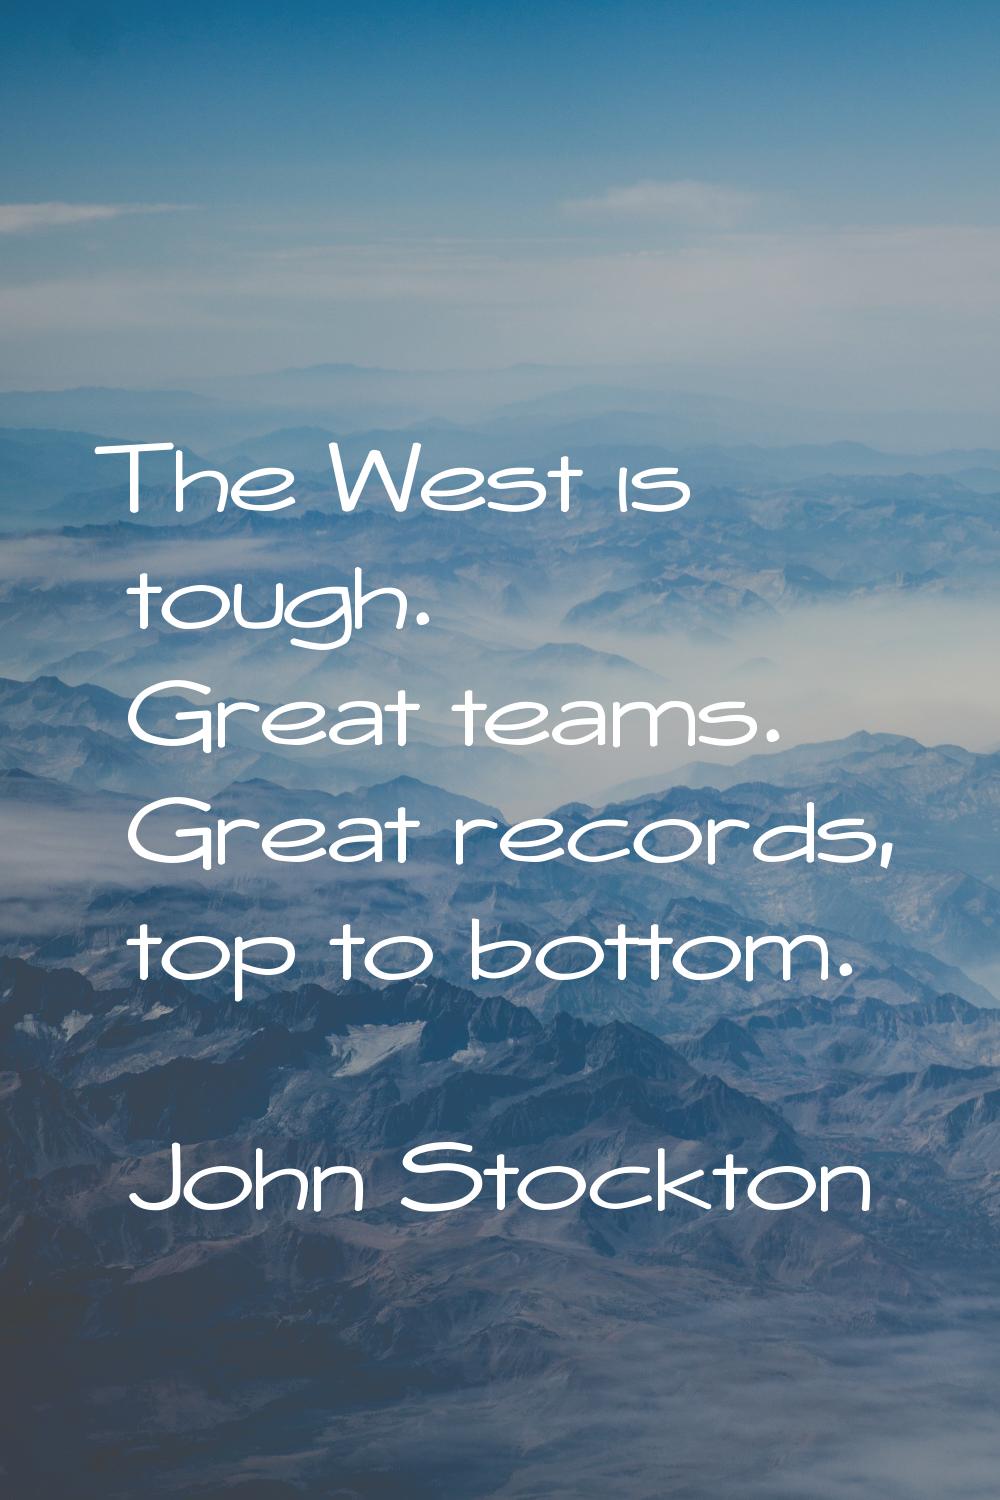 The West is tough. Great teams. Great records, top to bottom.